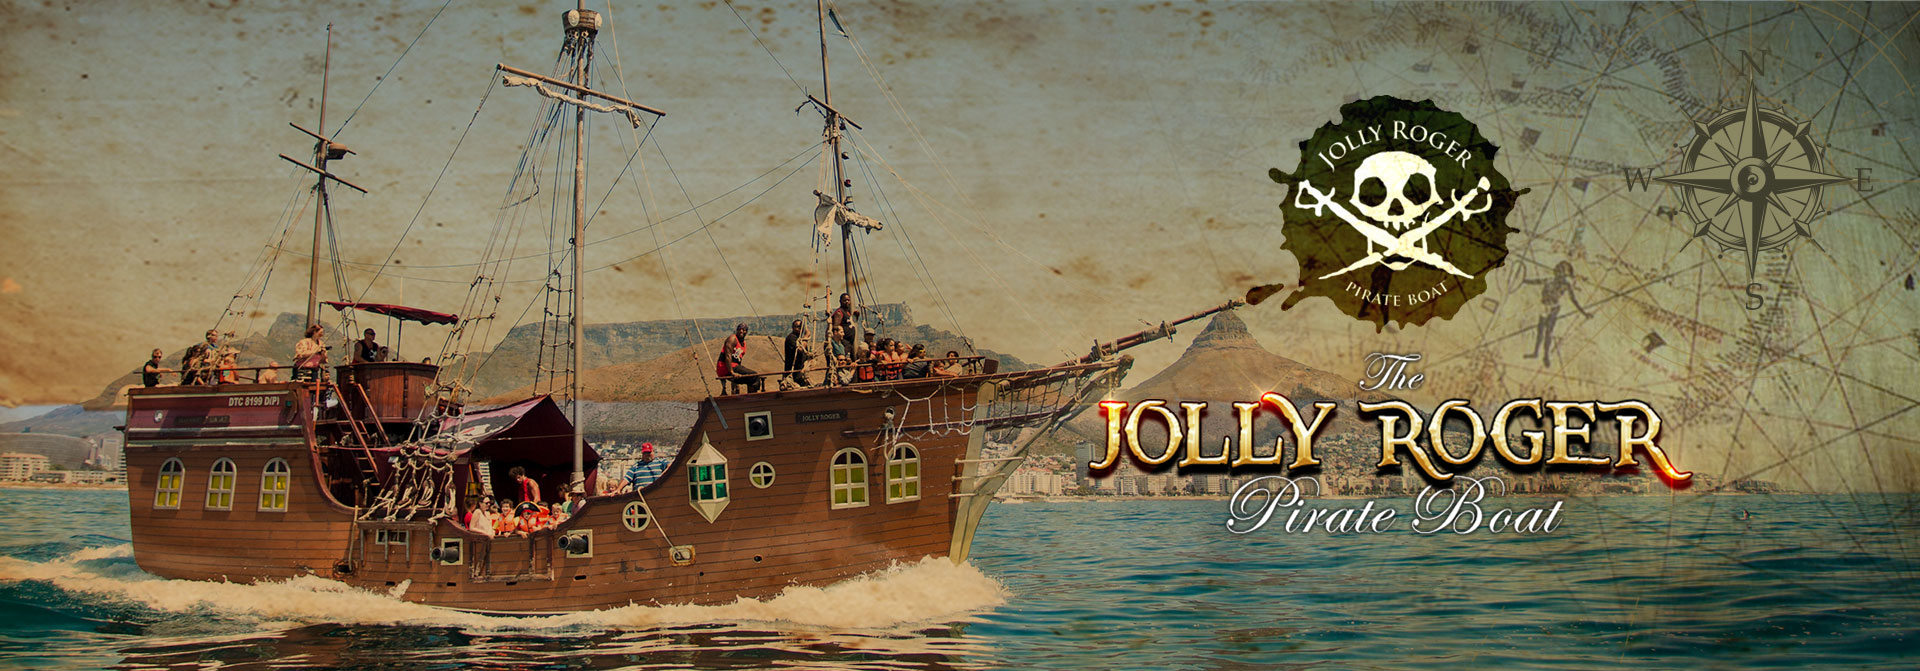 Jolly Roger Pirate Boat Banner Image